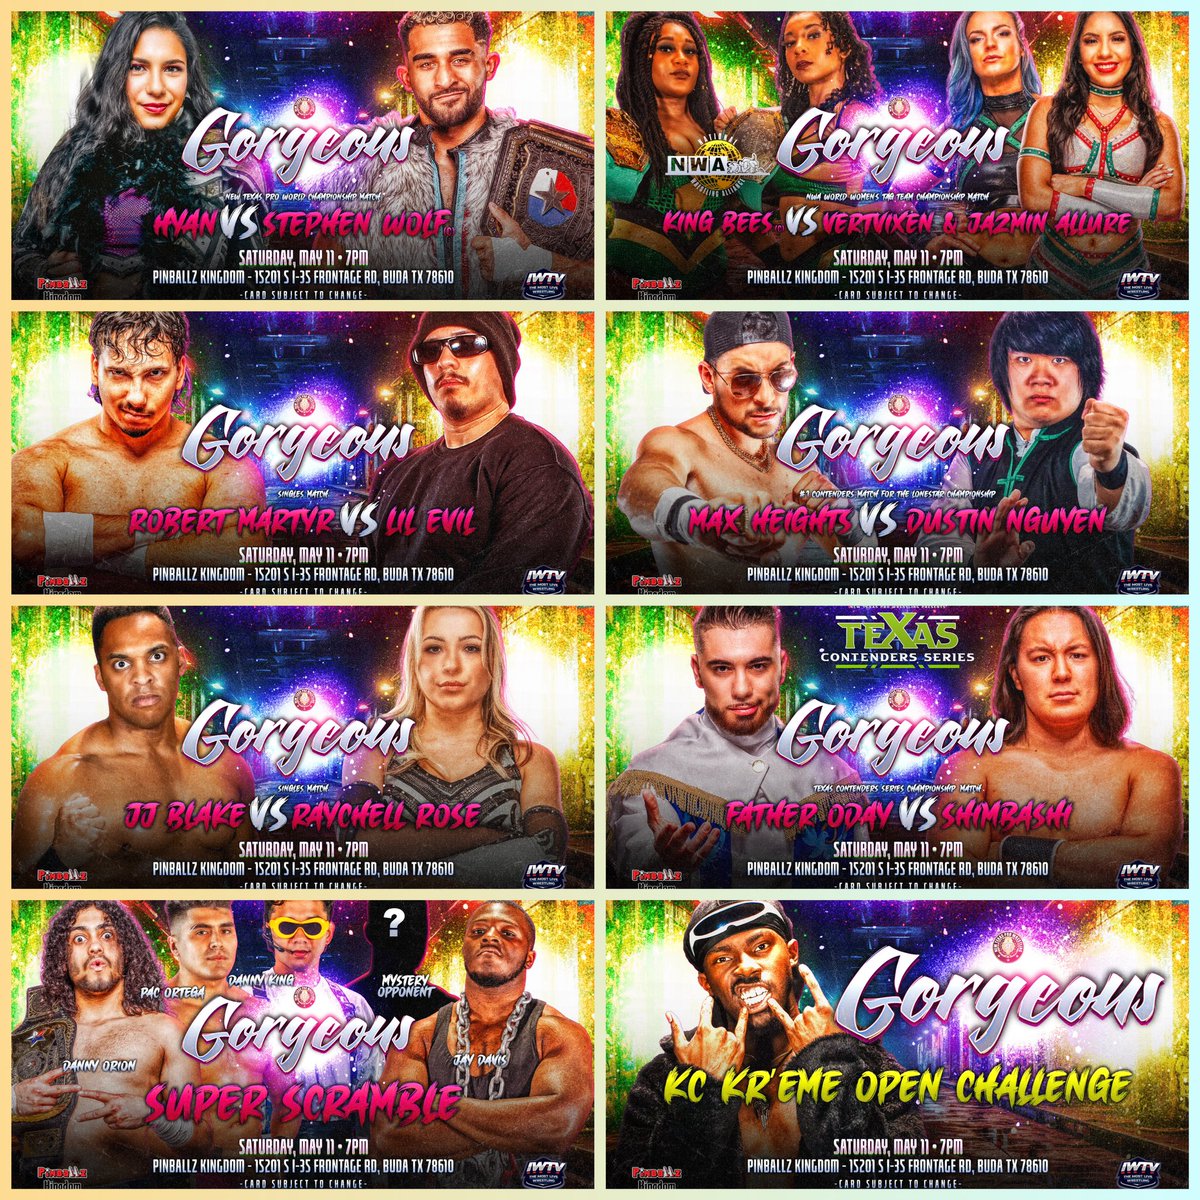 ❗️SATURDAY❗️ Hyan/Wolf King Bees/Tier One Martyr/Evil Max/Dustin JJ/Rose Oday/Shimbashi Super Scramble KC Kr’eme Open Challenge +more #Gorgeous • 5/11 • 7PM @pinballzaustin • Buda, TX Only 15 Seated GA Remain!! 🎟️: NewTexasPro.Com/Events